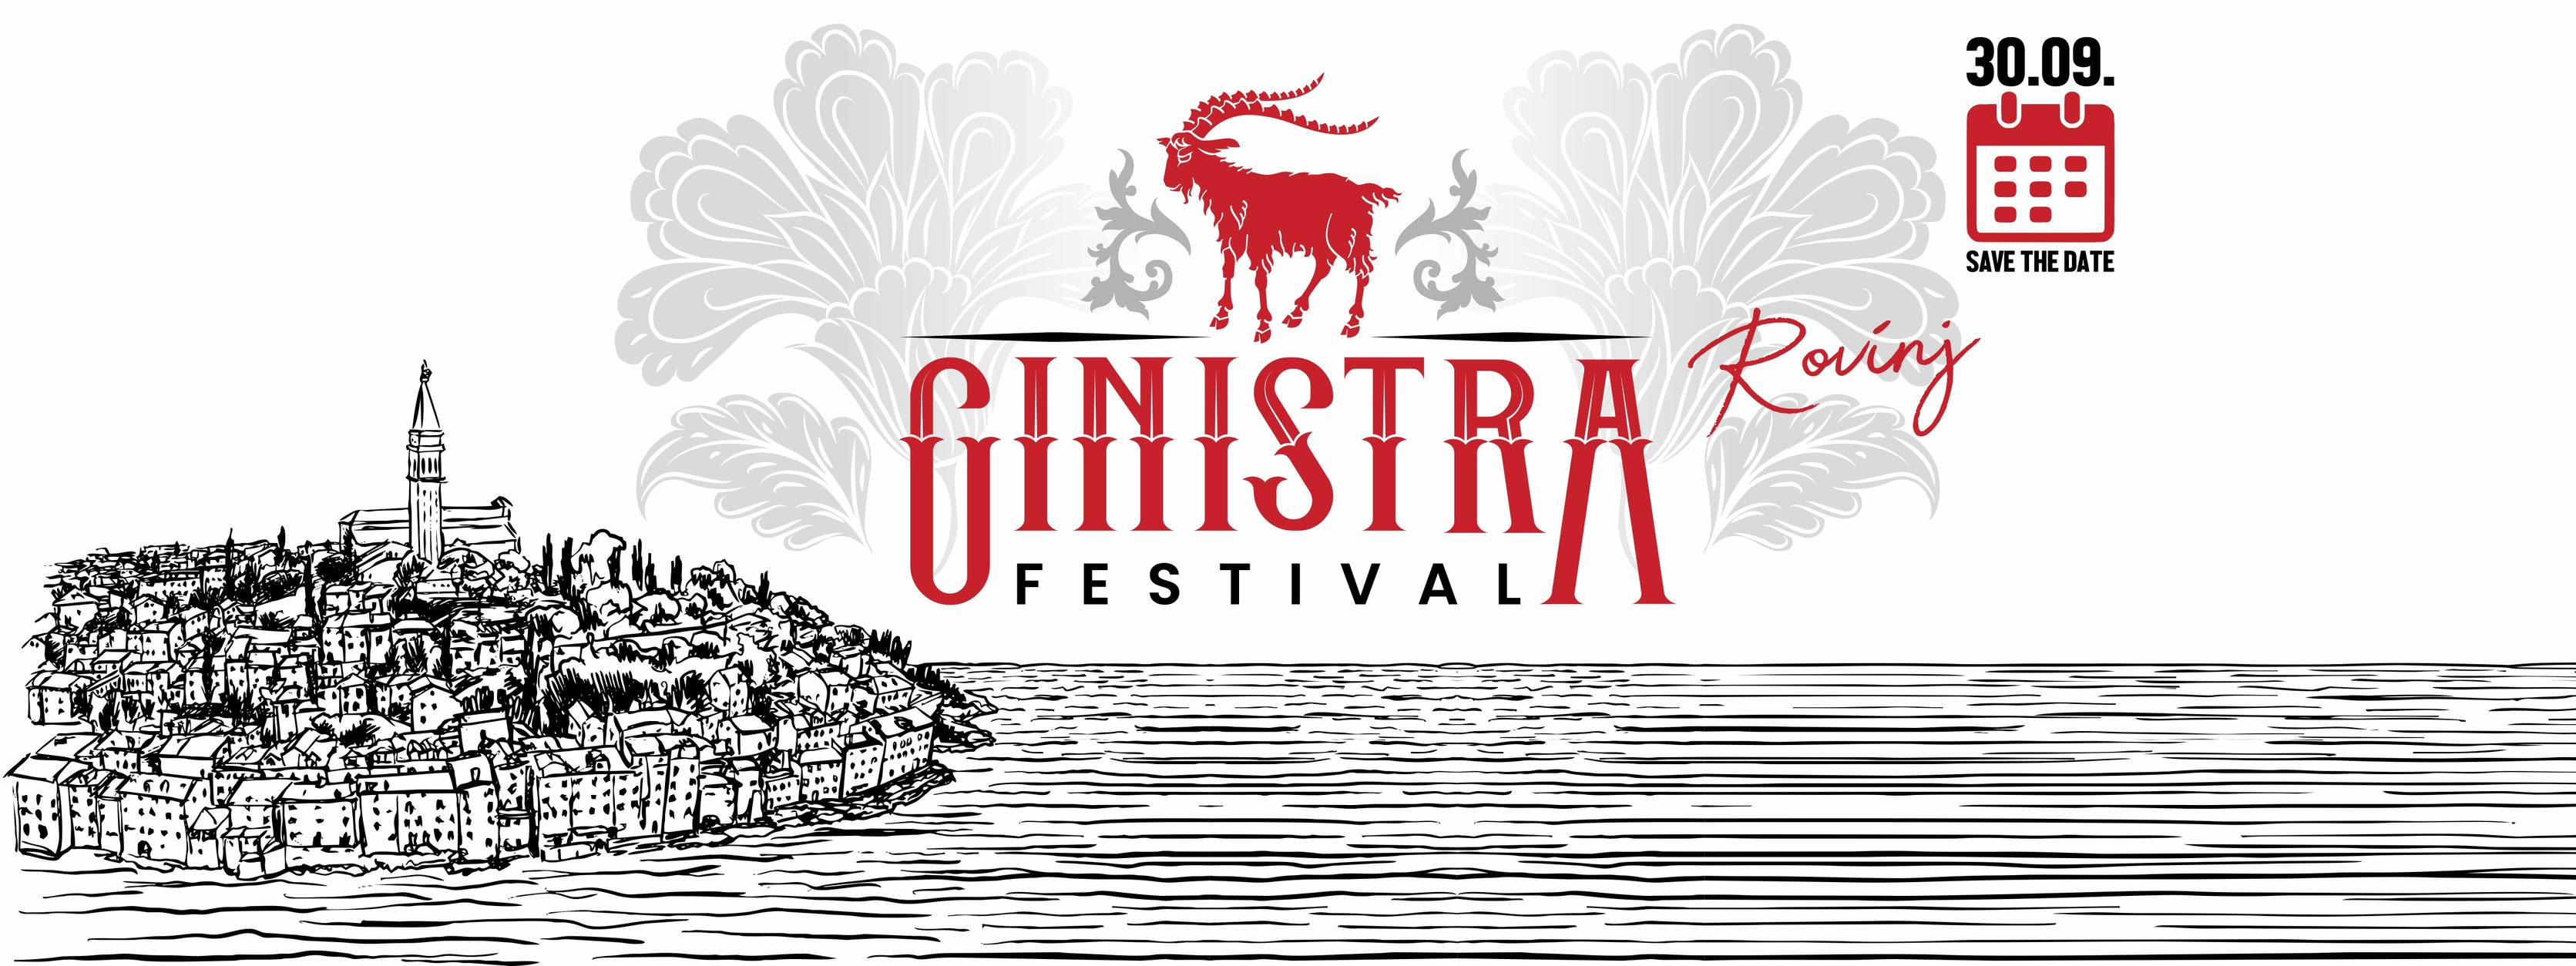 GinIstra_cover.jpg